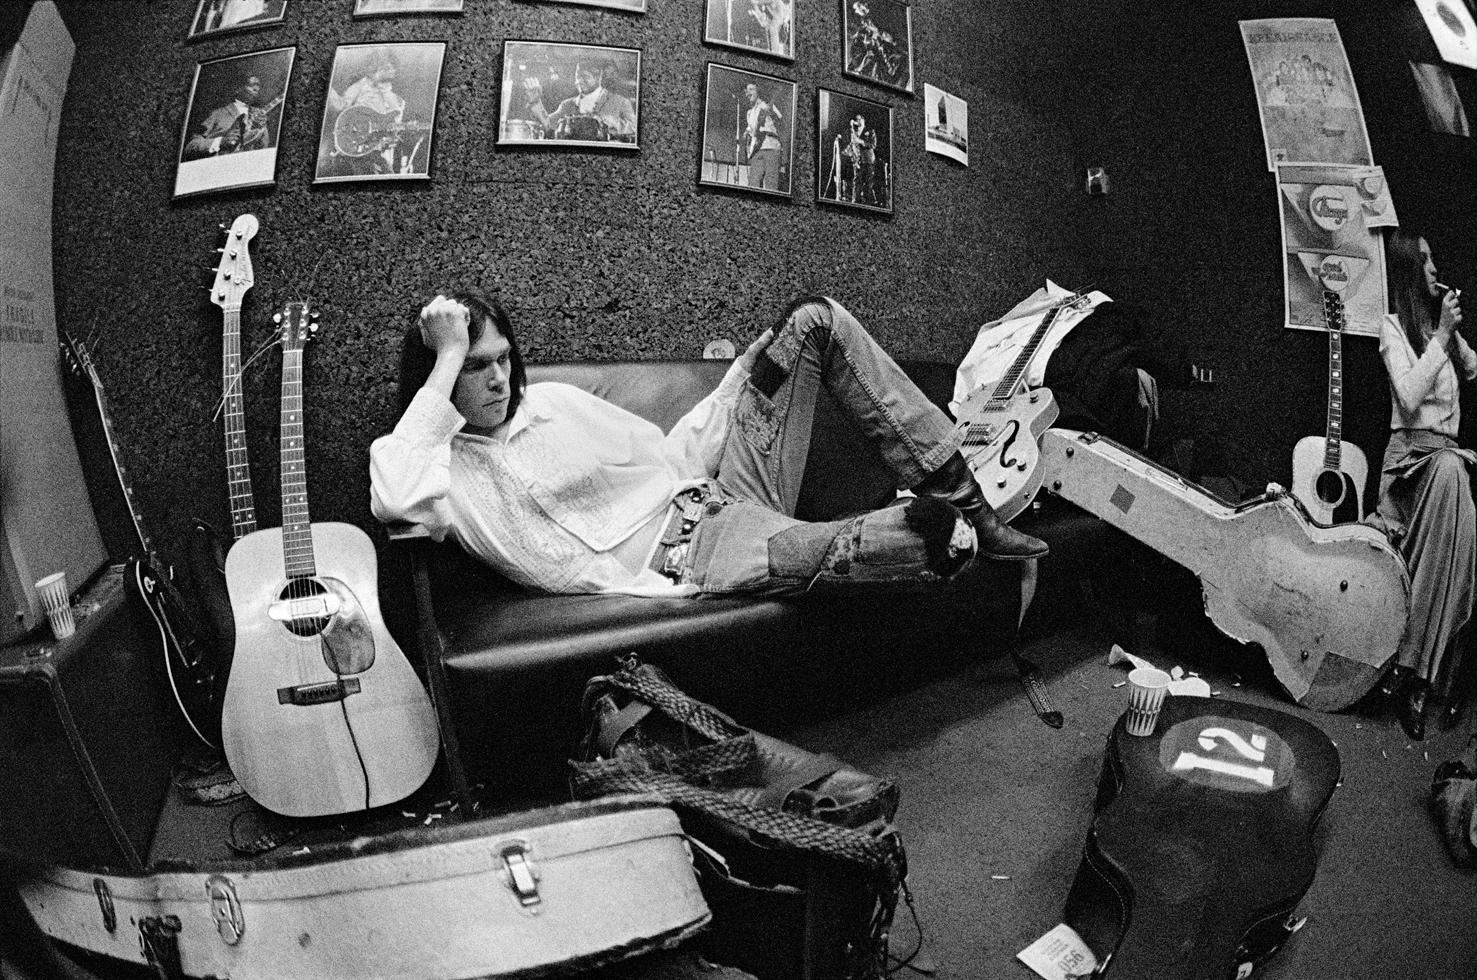 Joel Bernstein Black and White Photograph - Neil Young backstage